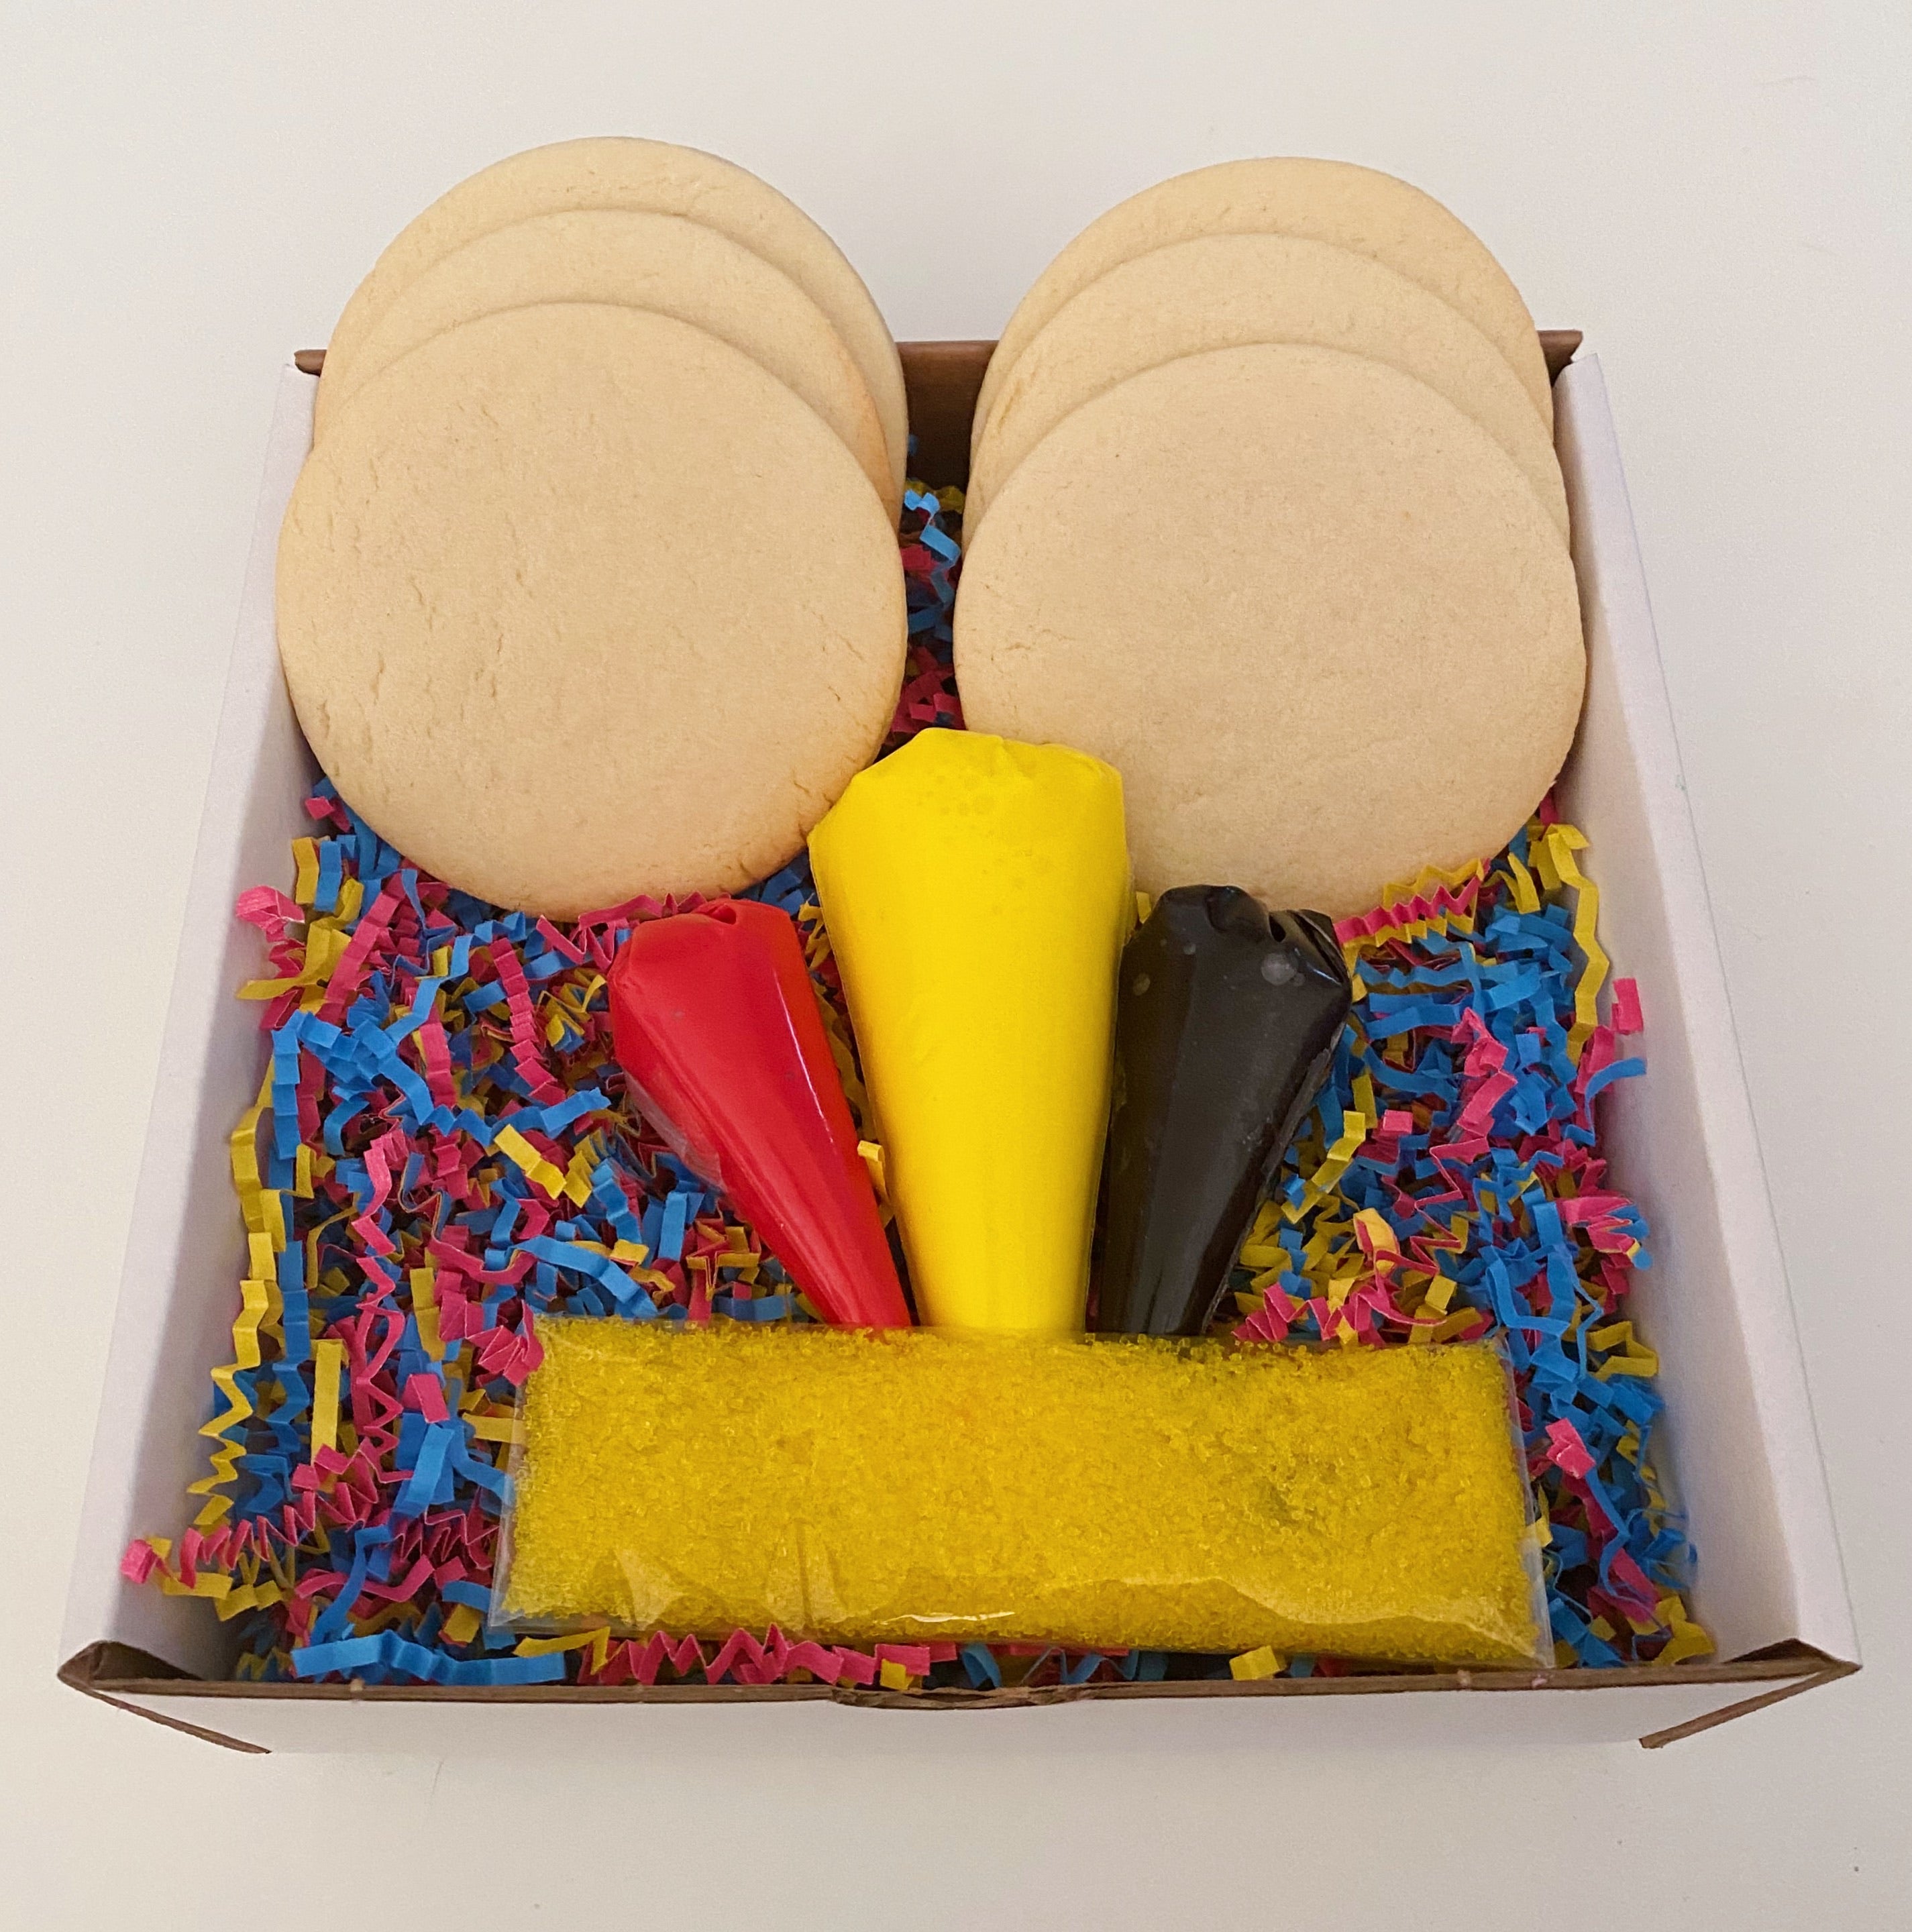 DECORATE YOUR OWN EMOJI COOKIE KIT